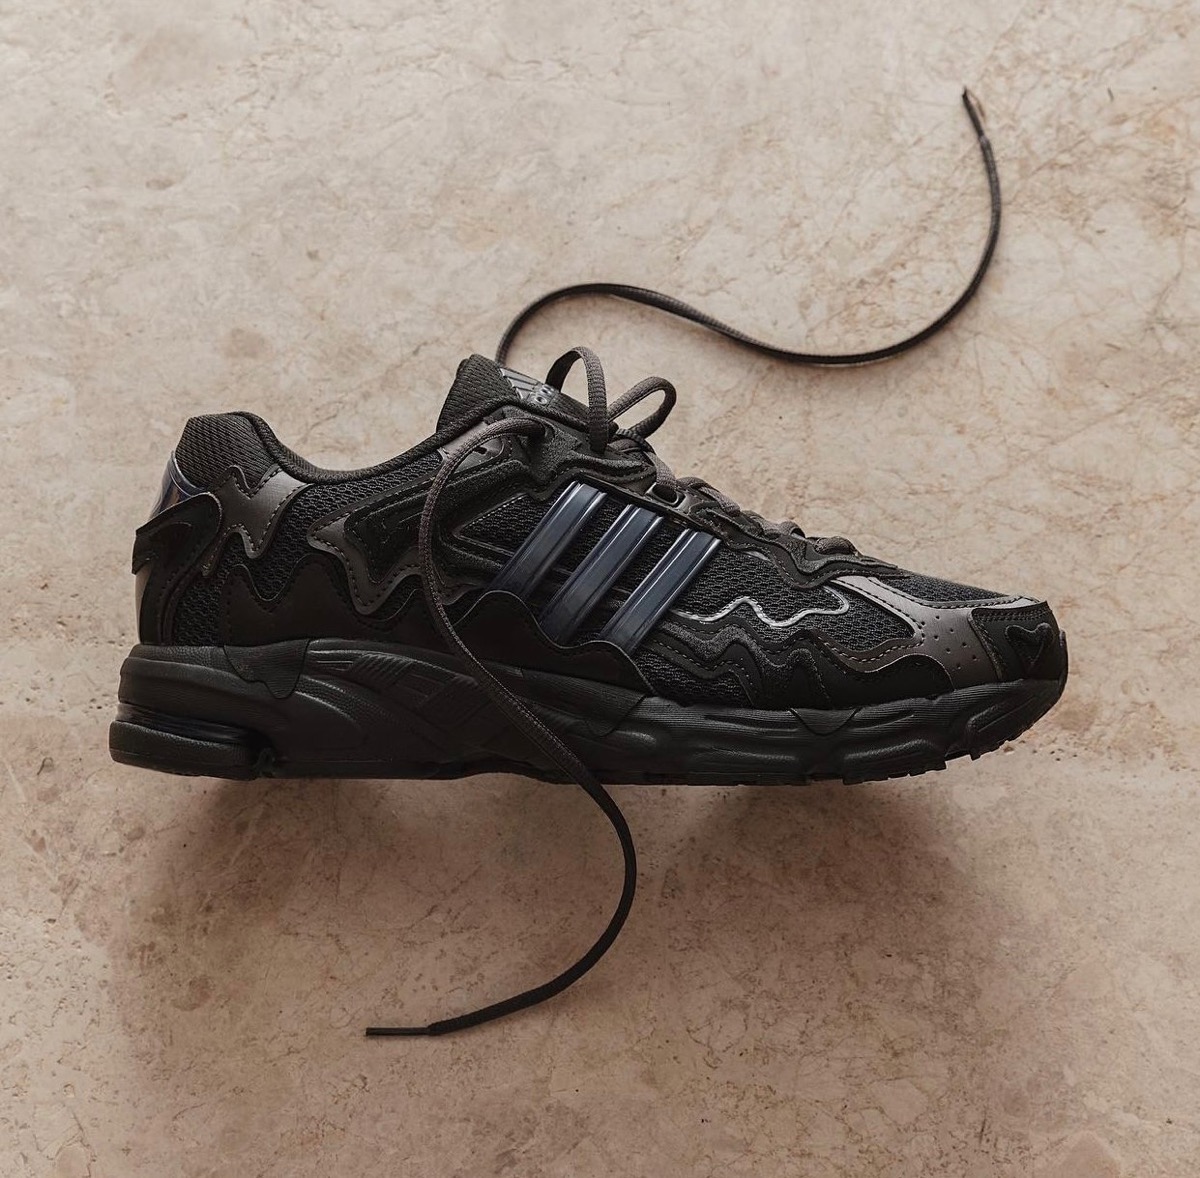 Bad Bunny × adidas Response CL “Triple Black”が国内6月24日より発売予定 ［ID0805］ UP  TO DATE